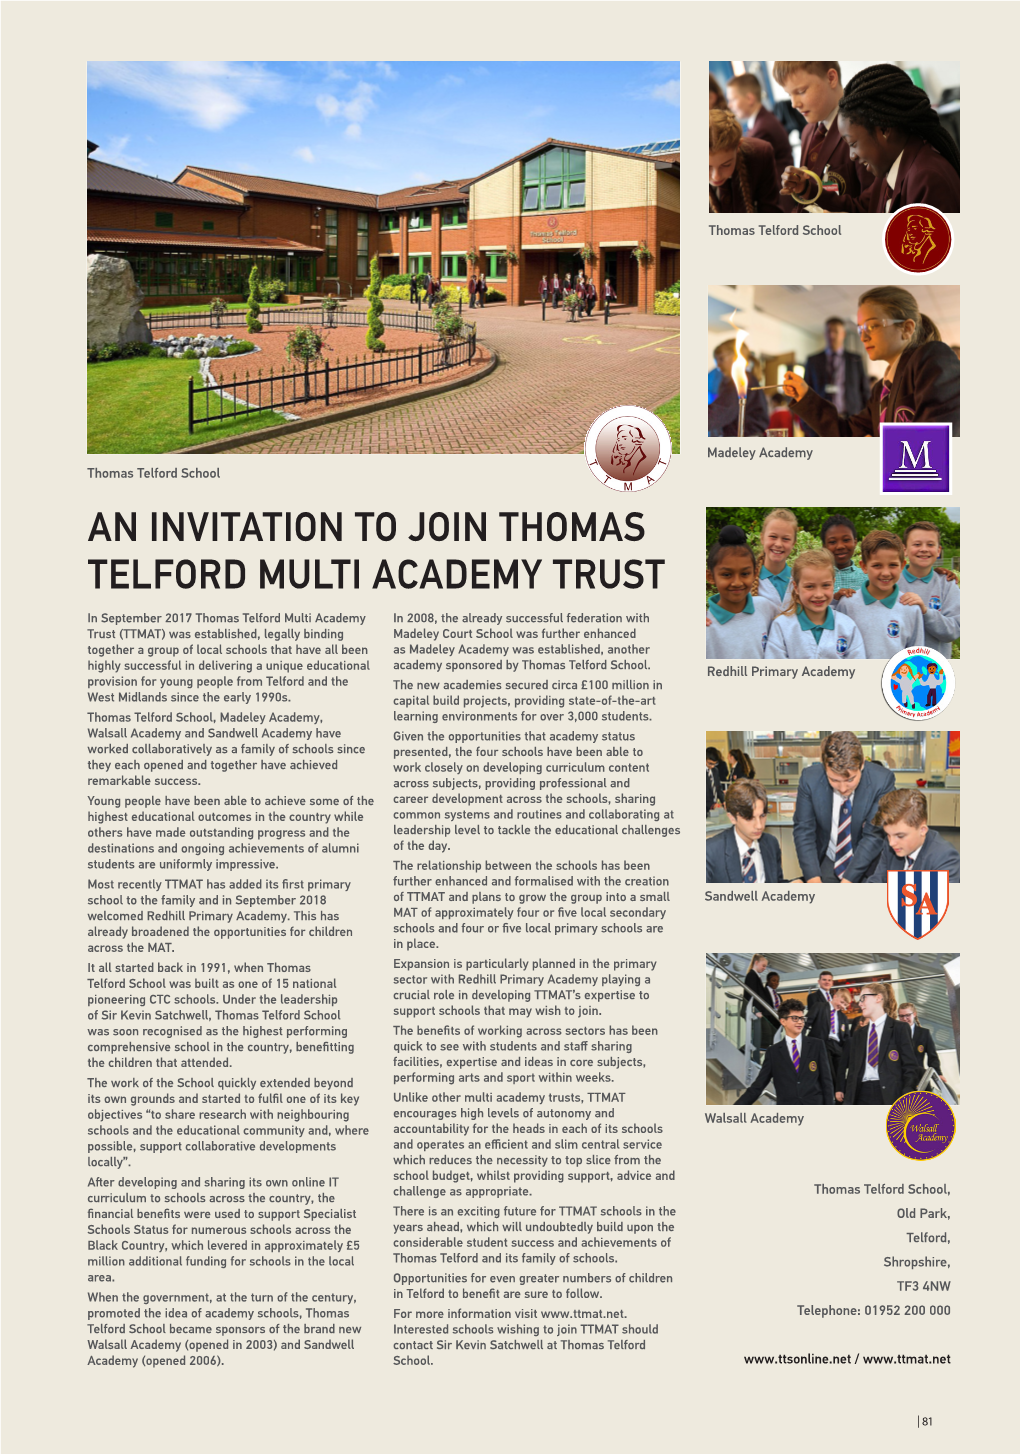 An Invitation to Join Thomas Telford Multi Academy Trust